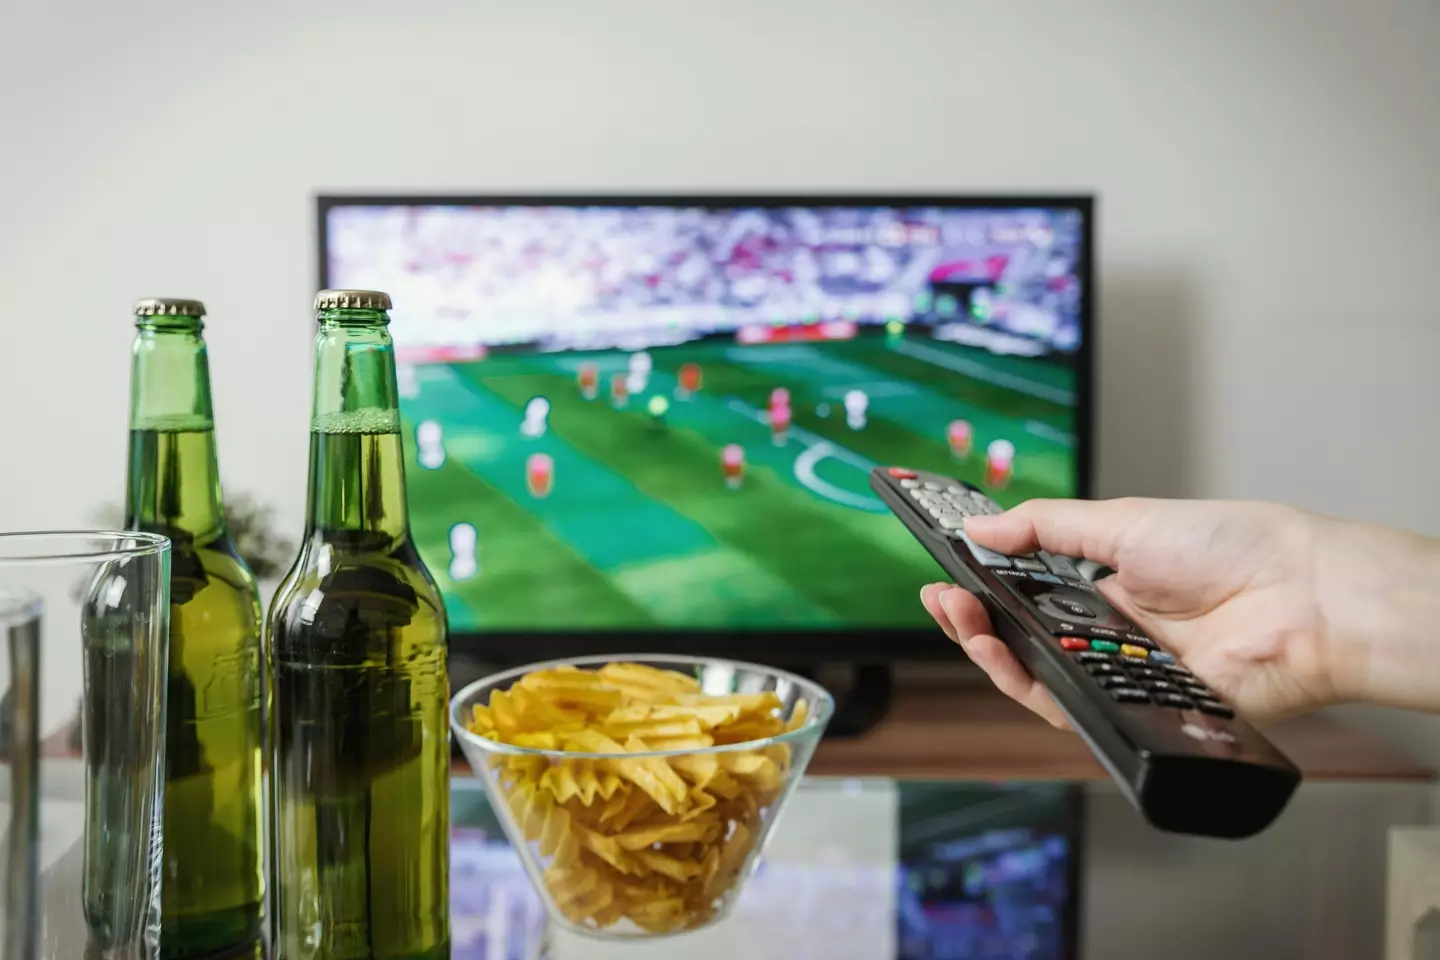 With the option to add Sky Sports, you can also create the ultimate viewing package.